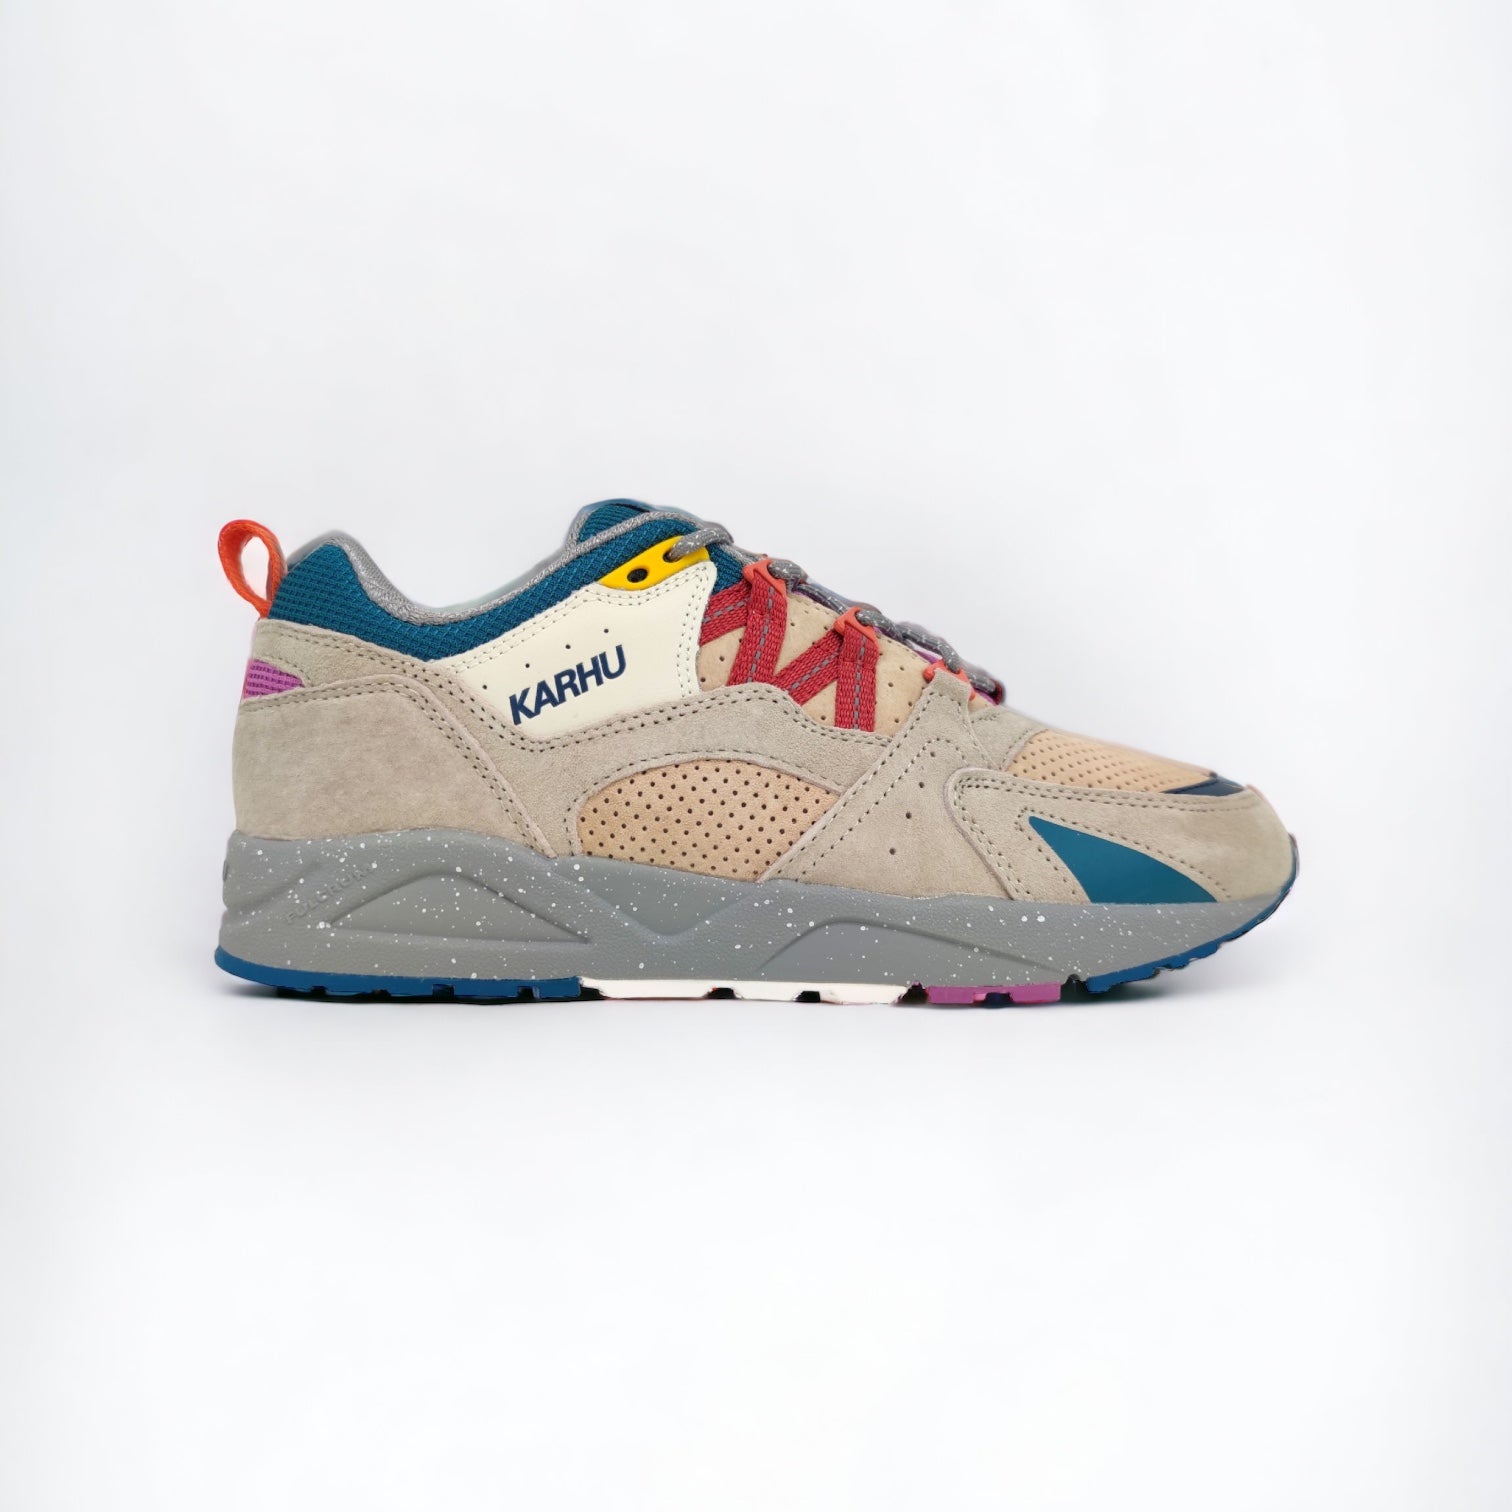 Karhu Fusion 2.0 Silver Lining / Mineral Red